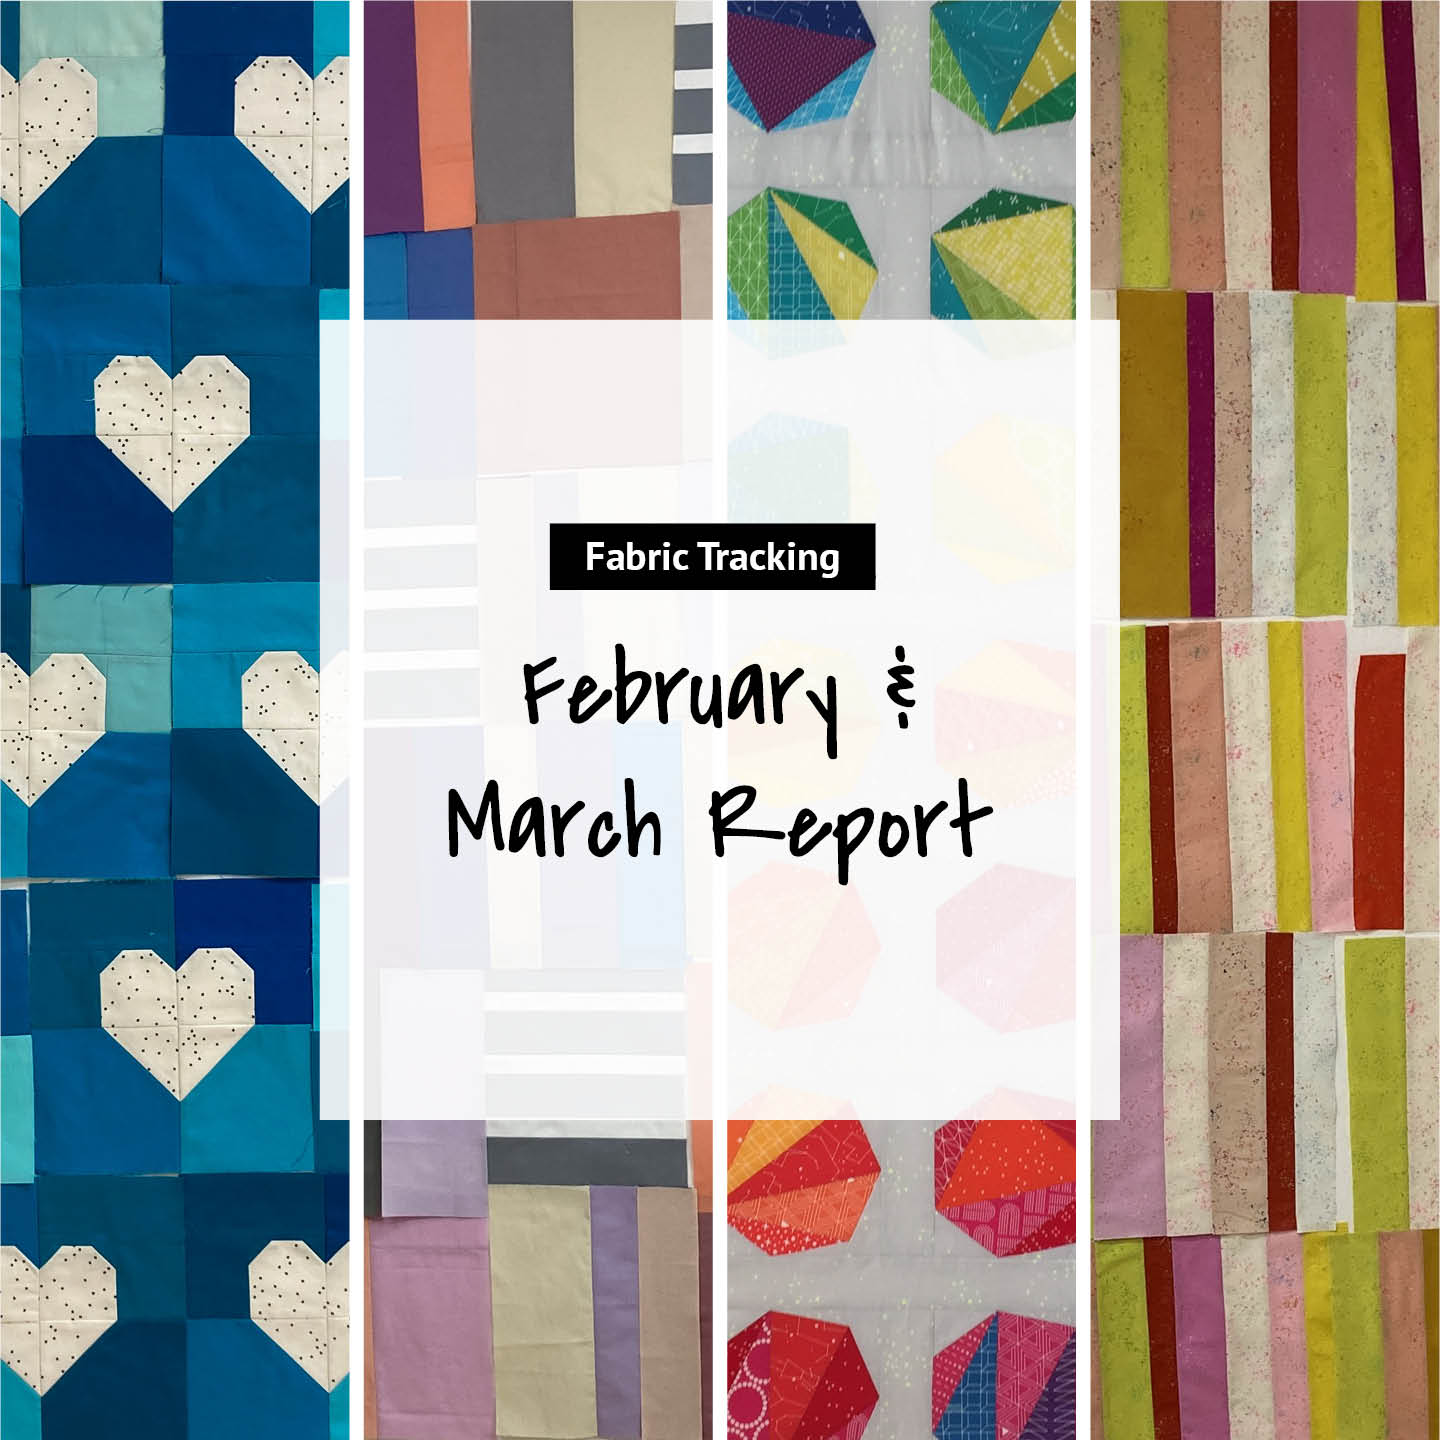 Fabric Tracking - February & March Report | mellmeyer.de